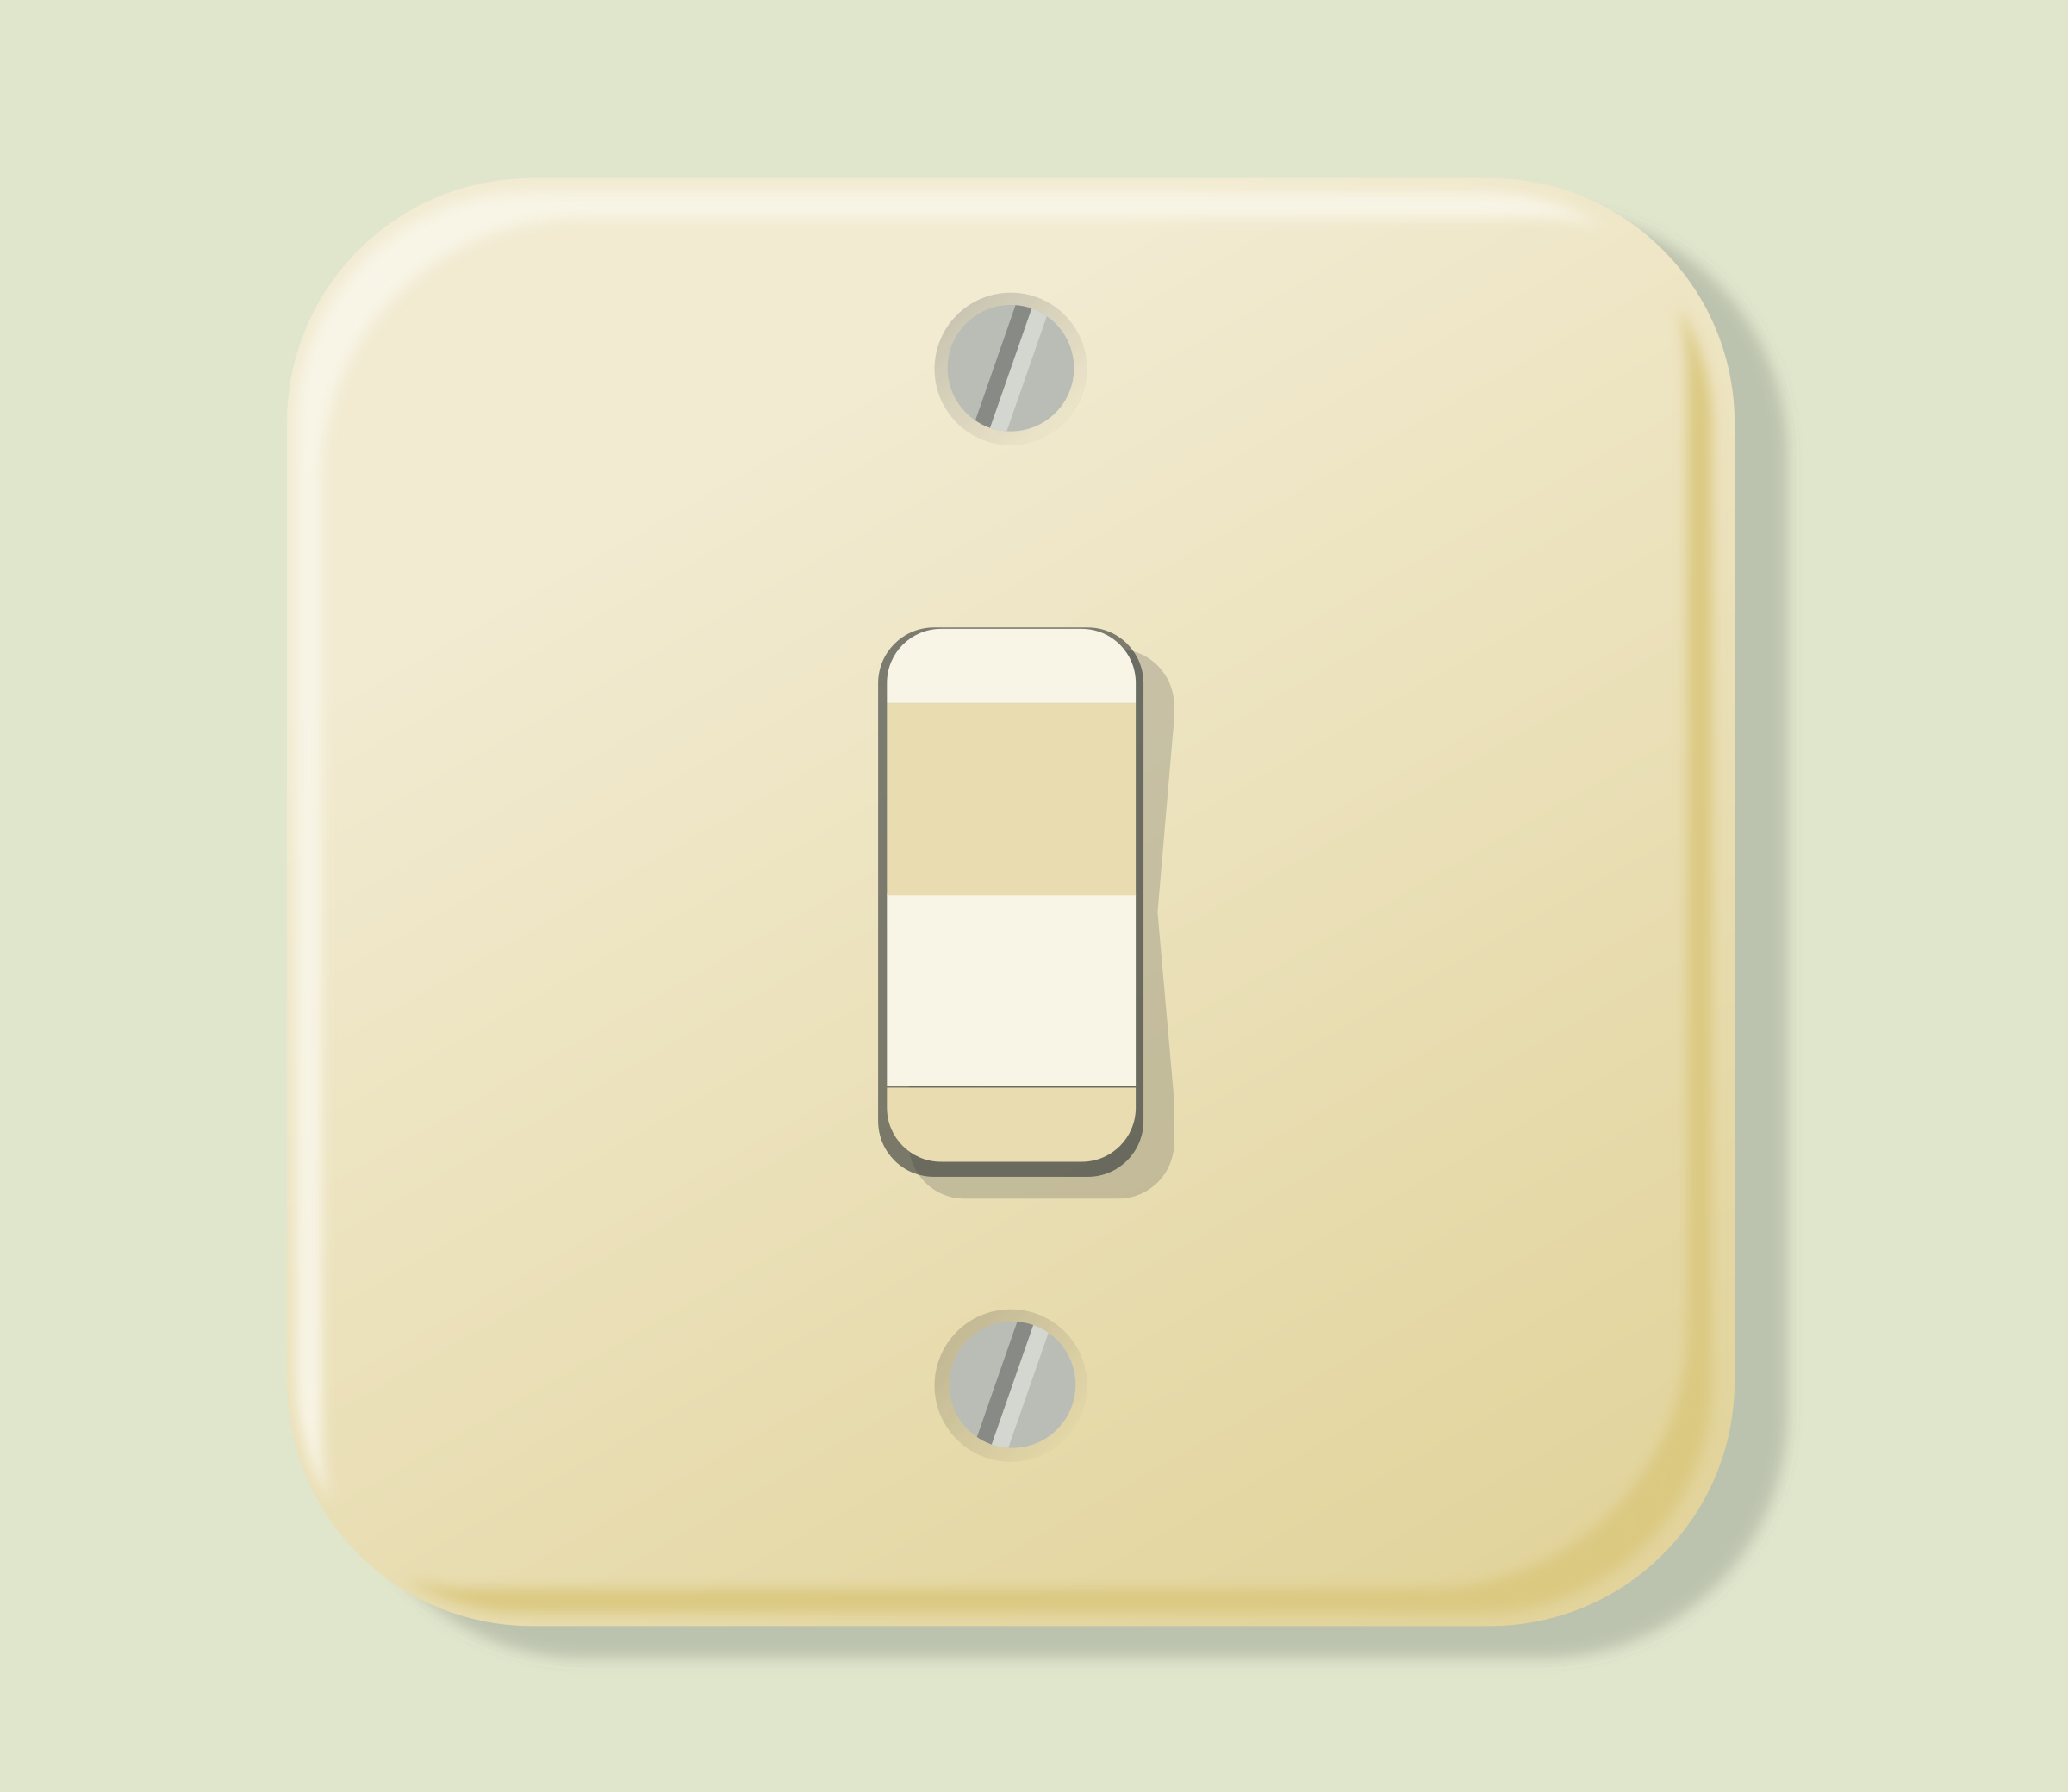 electricity clipart switch